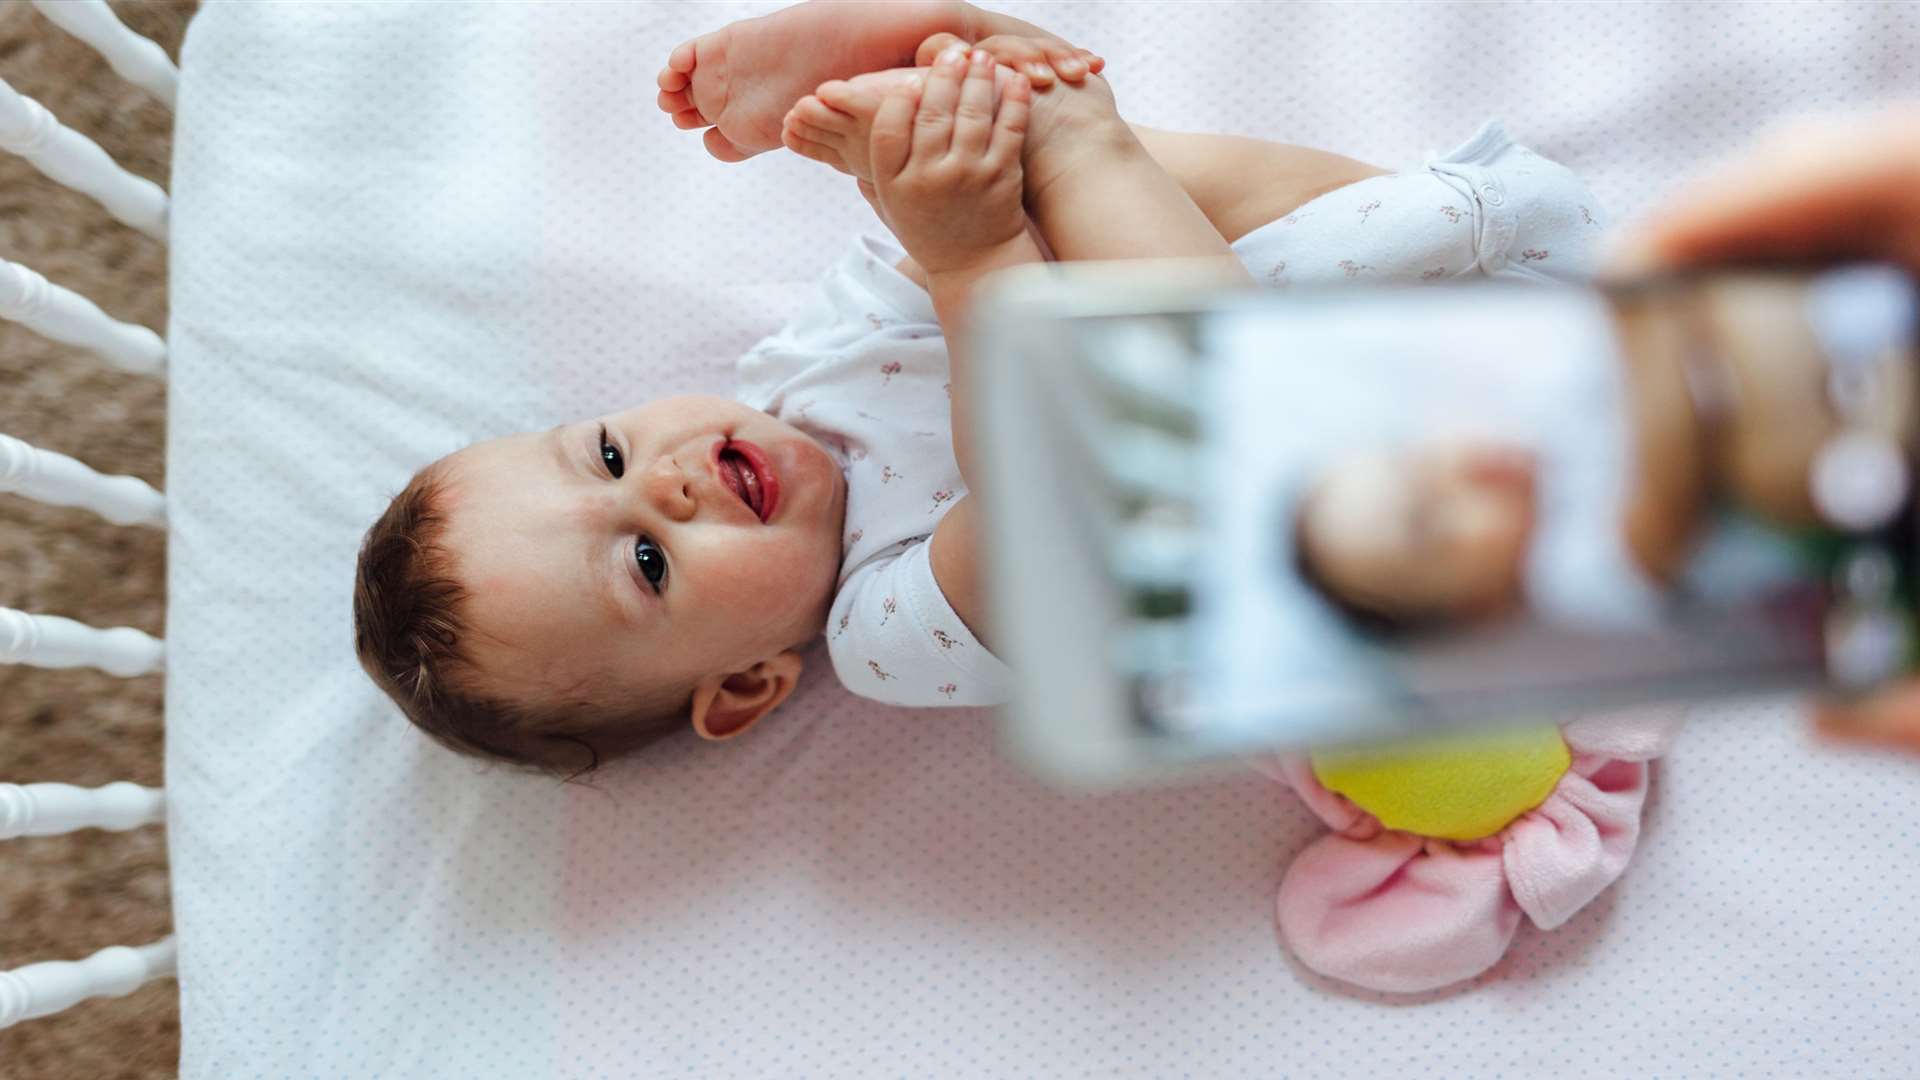 'The vast majority of your friends and family are likely to be thrilled to coo over your baby photos, however there are ways to be more mindful of what you post'